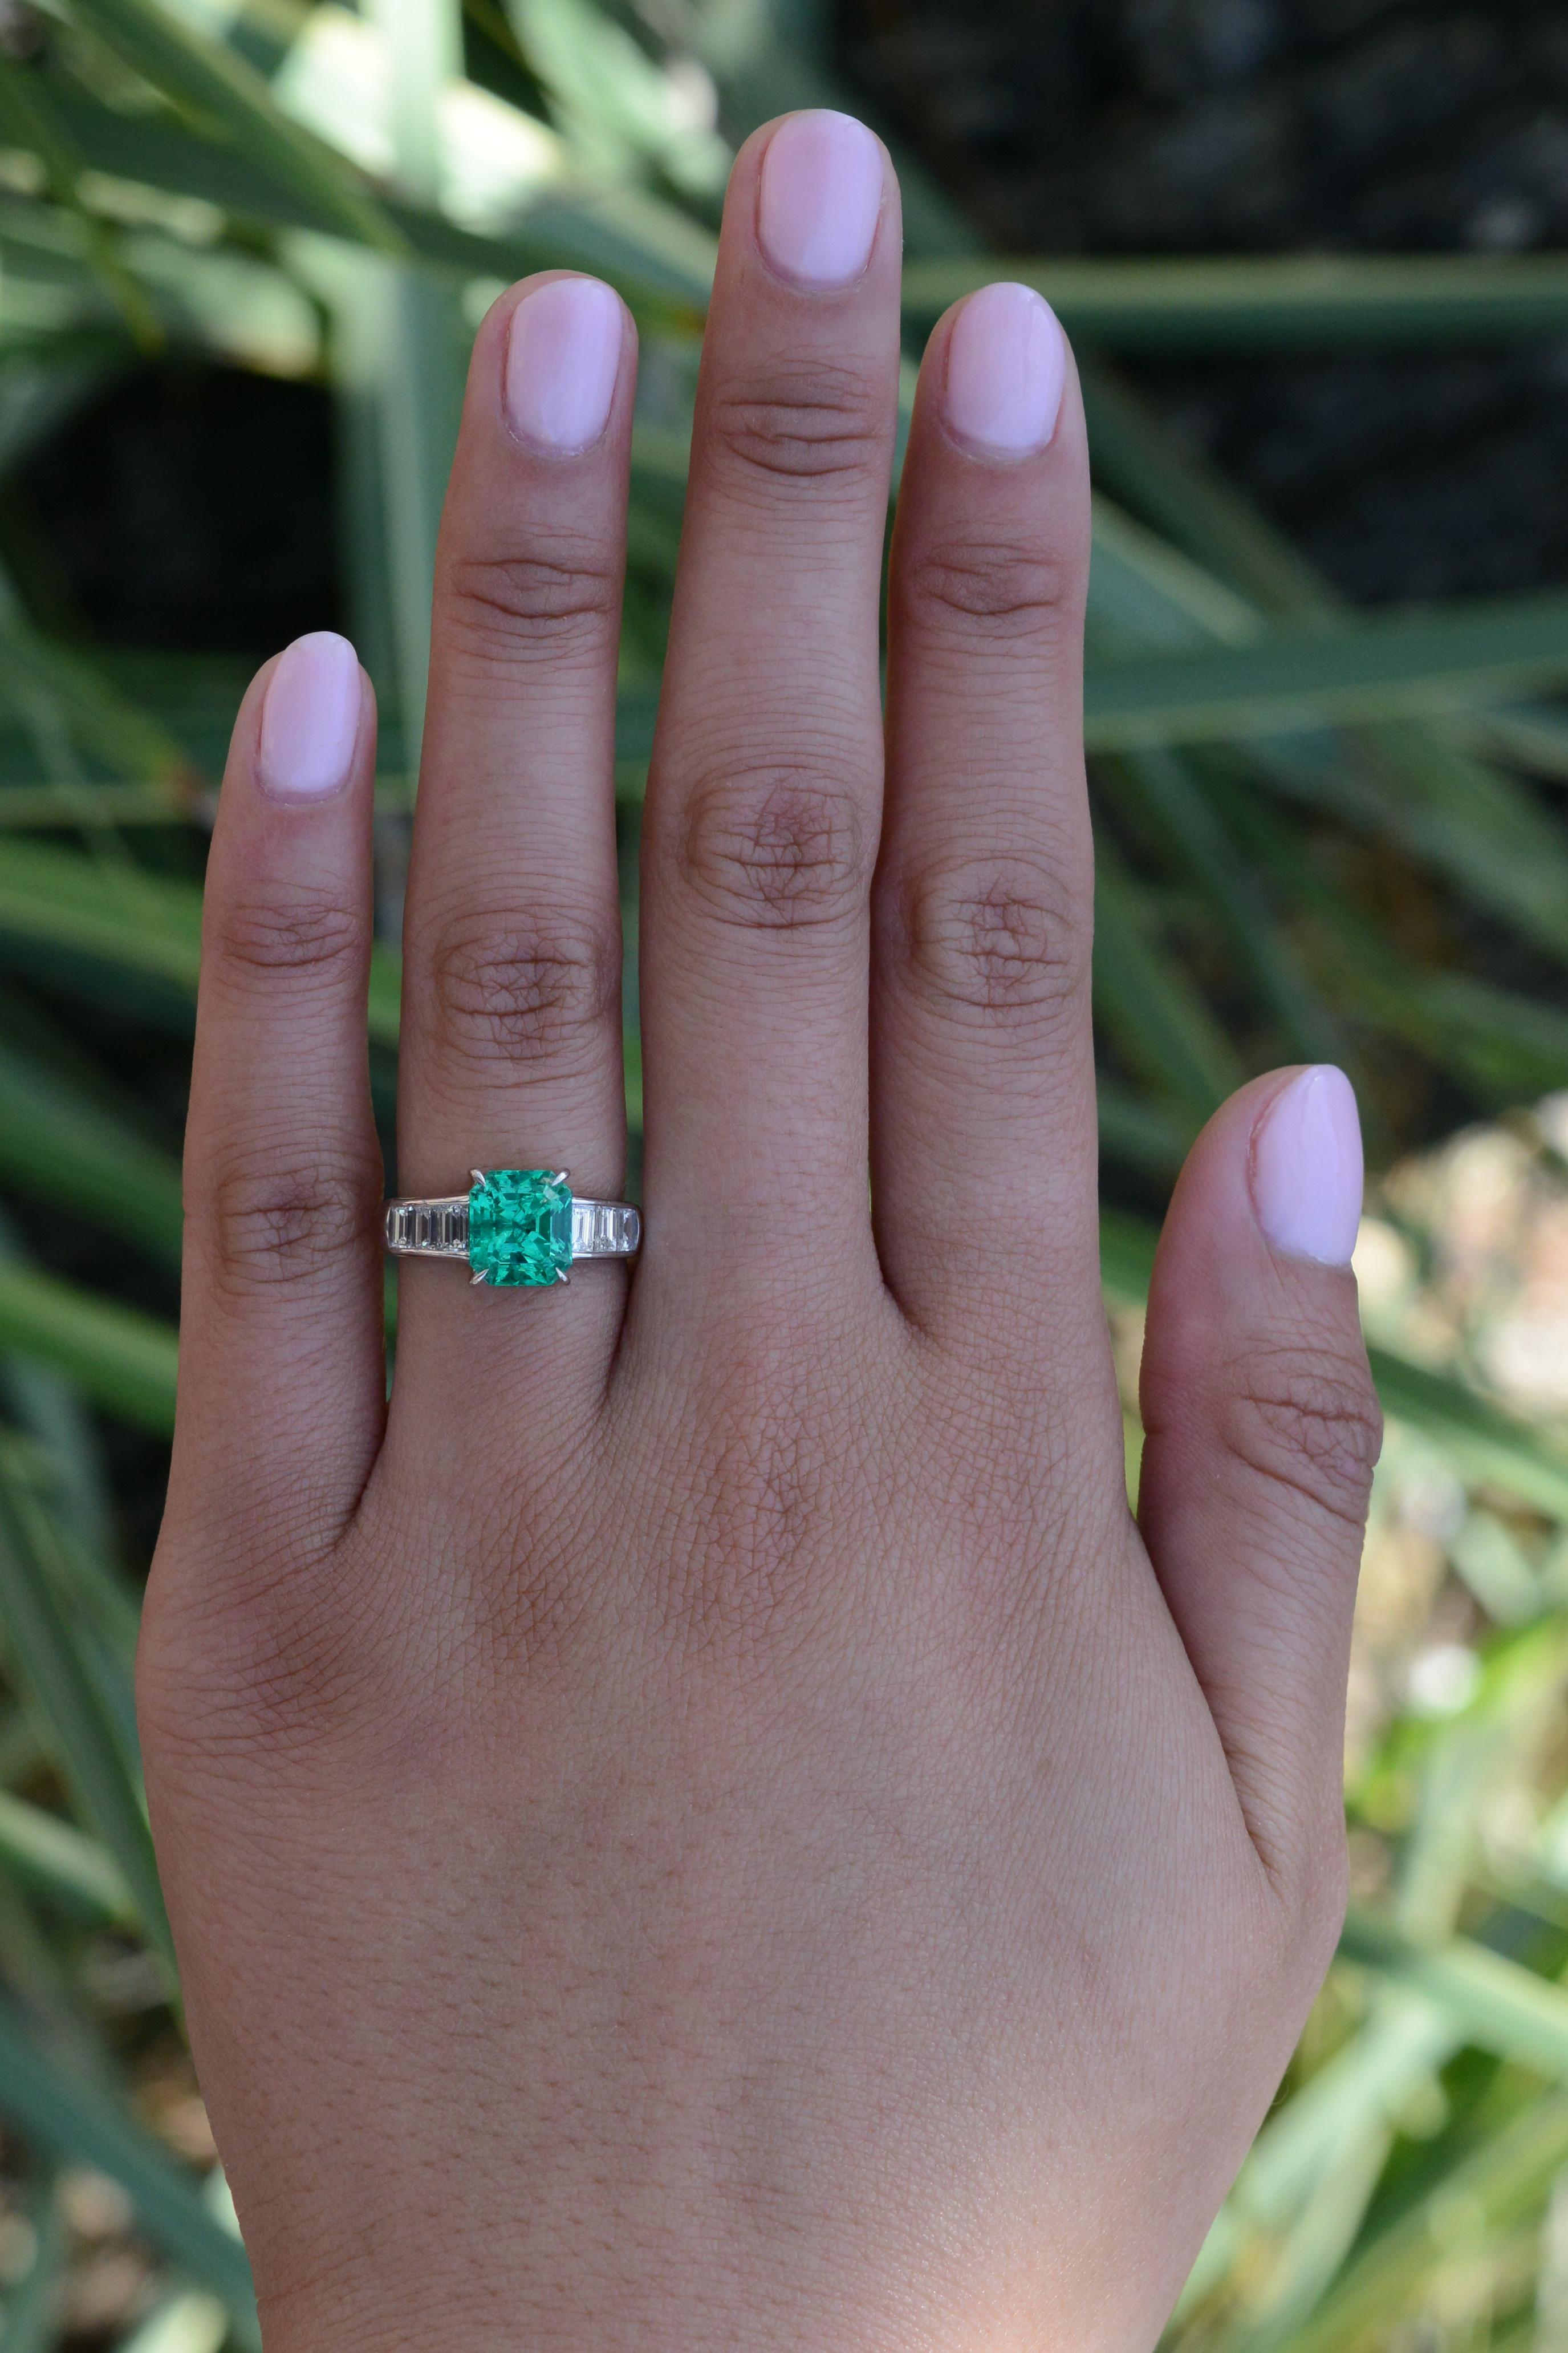 This incredible emerald has an intensity and brilliancy that absolutely captures you. The gem is accompanied by an American Gemological Laboratory certificate verifying Colombian origin which produces some of the finest quality emeralds. Mounted on